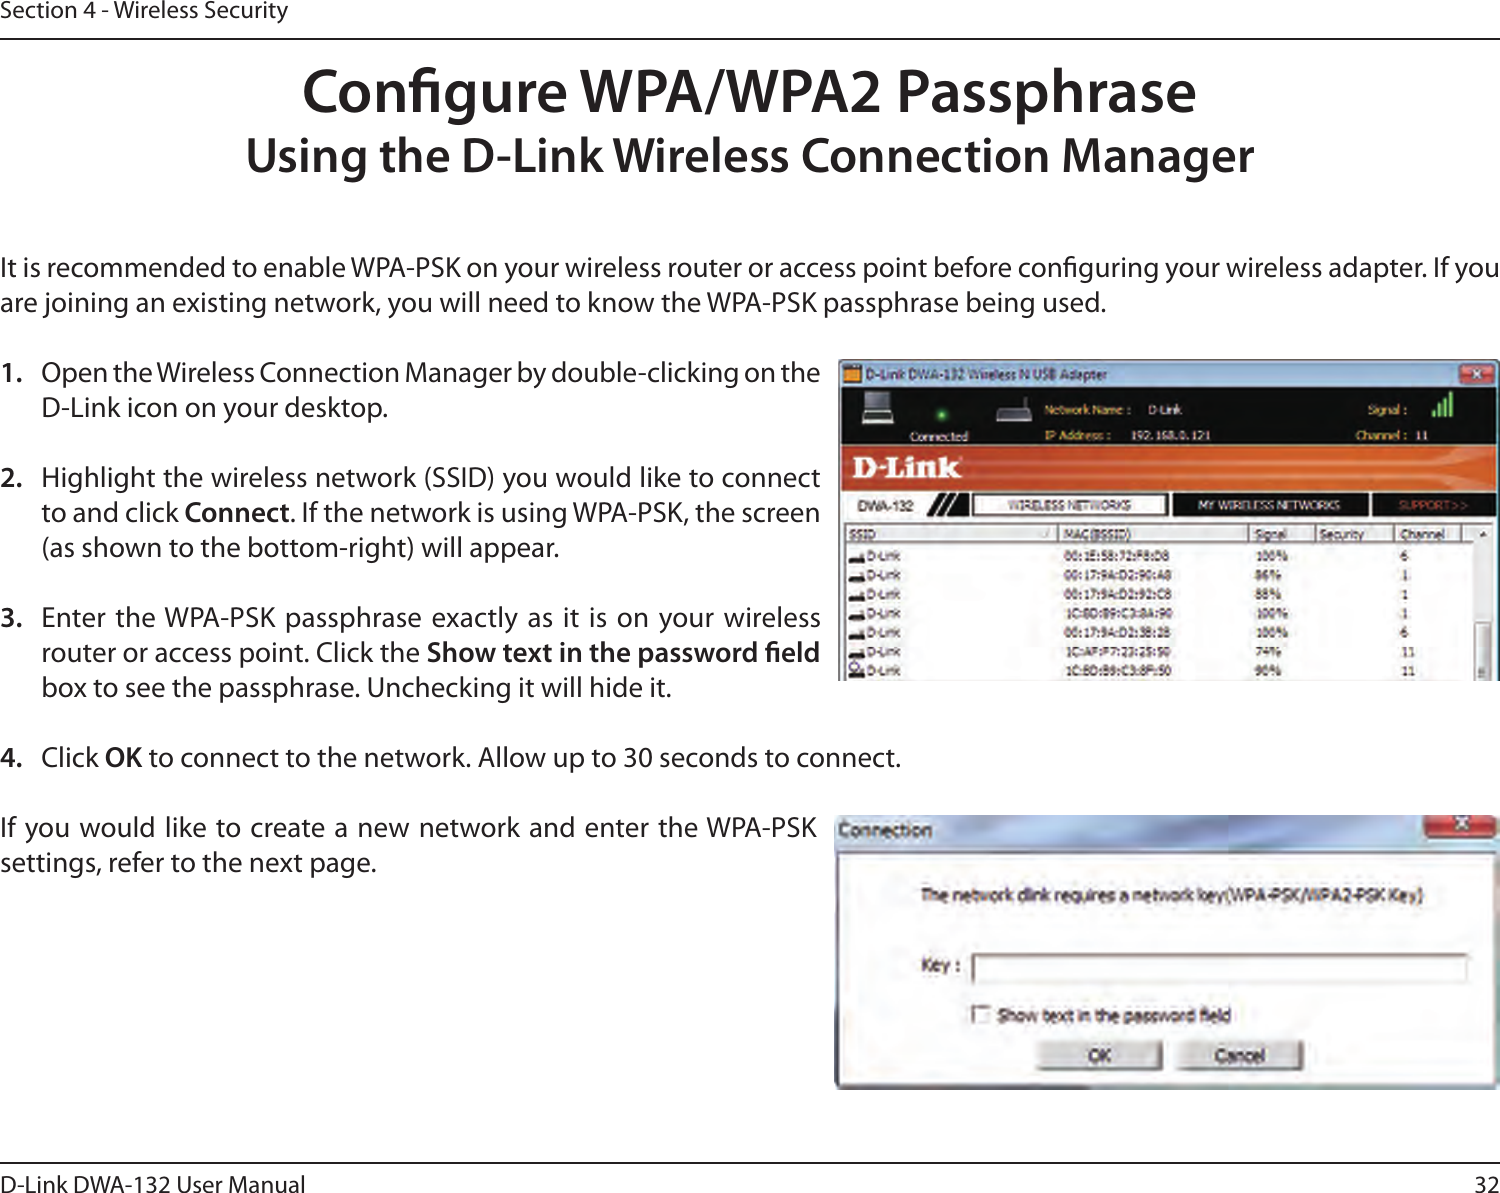 32D-Link DWA-132 User ManualSection 4 - Wireless SecurityCongure WPA/WPA2 PassphraseUsing the D-Link Wireless Connection ManagerIt is recommended to enable WPA-PSK on your wireless router or access point before conguring your wireless adapter. If you are joining an existing network, you will need to know the WPA-PSK passphrase being used.1.  Open the Wireless Connection Manager by double-clicking on the D-Link icon on your desktop. 2.  Highlight the wireless network (SSID) you would like to connect to and click Connect. If the network is using WPA-PSK, the screen (as shown to the bottom-right) will appear. 3.  Enter  the WPA-PSK passphrase exactly  as  it  is on your wireless router or access point. Click the Show text in the password eld box to see the passphrase. Unchecking it will hide it.4.  Click OK to connect to the network. Allow up to 30 seconds to connect.If you would like to create a new network and enter the WPA-PSK settings, refer to the next page.